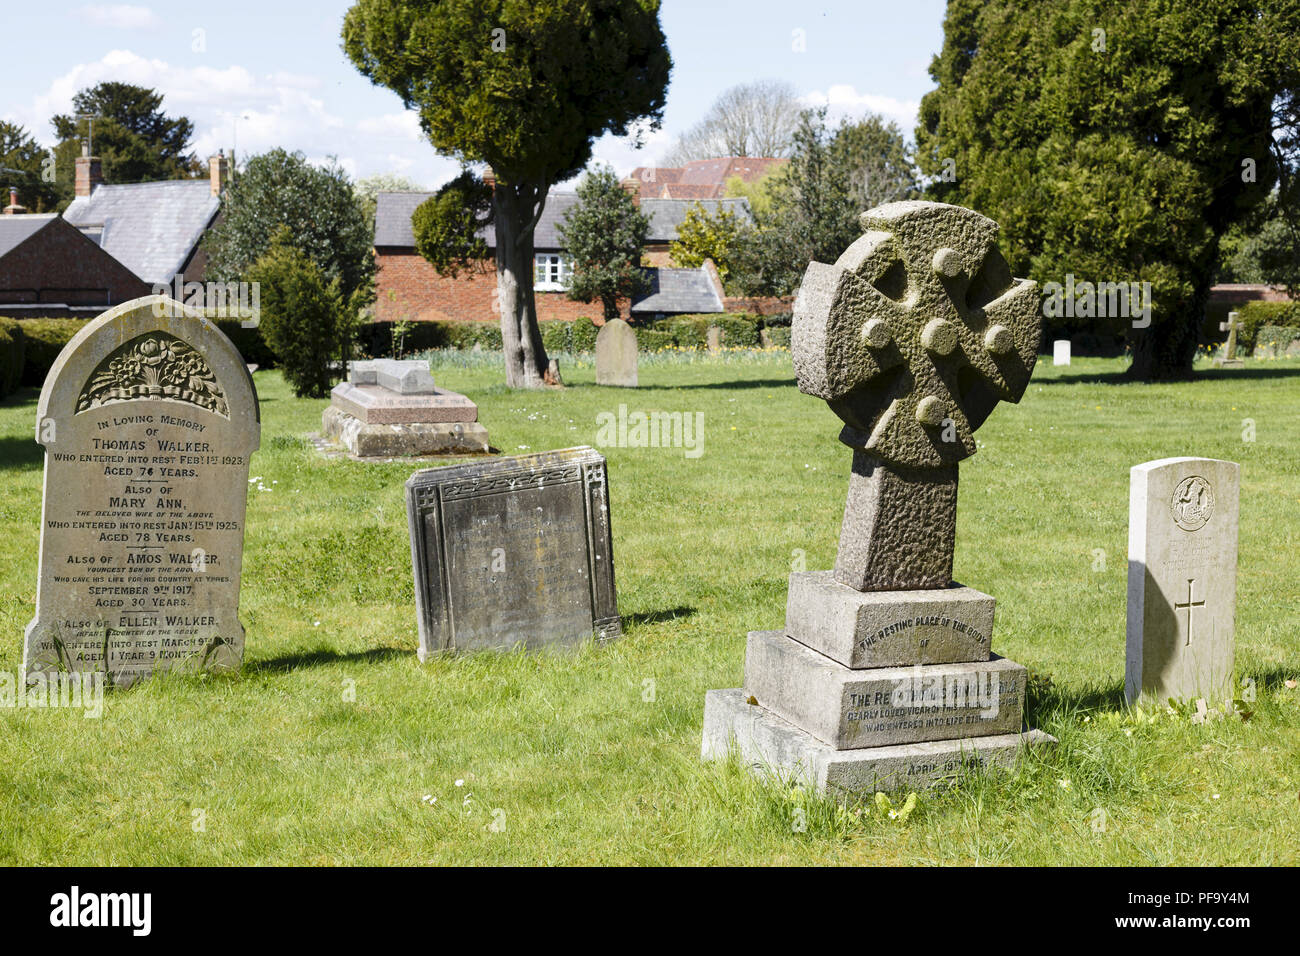 Winslow, UK - April 27, 2015. Old gravestones and headstones in an English graveyard in the historic town of Winslow, Buckinghamshire Stock Photo